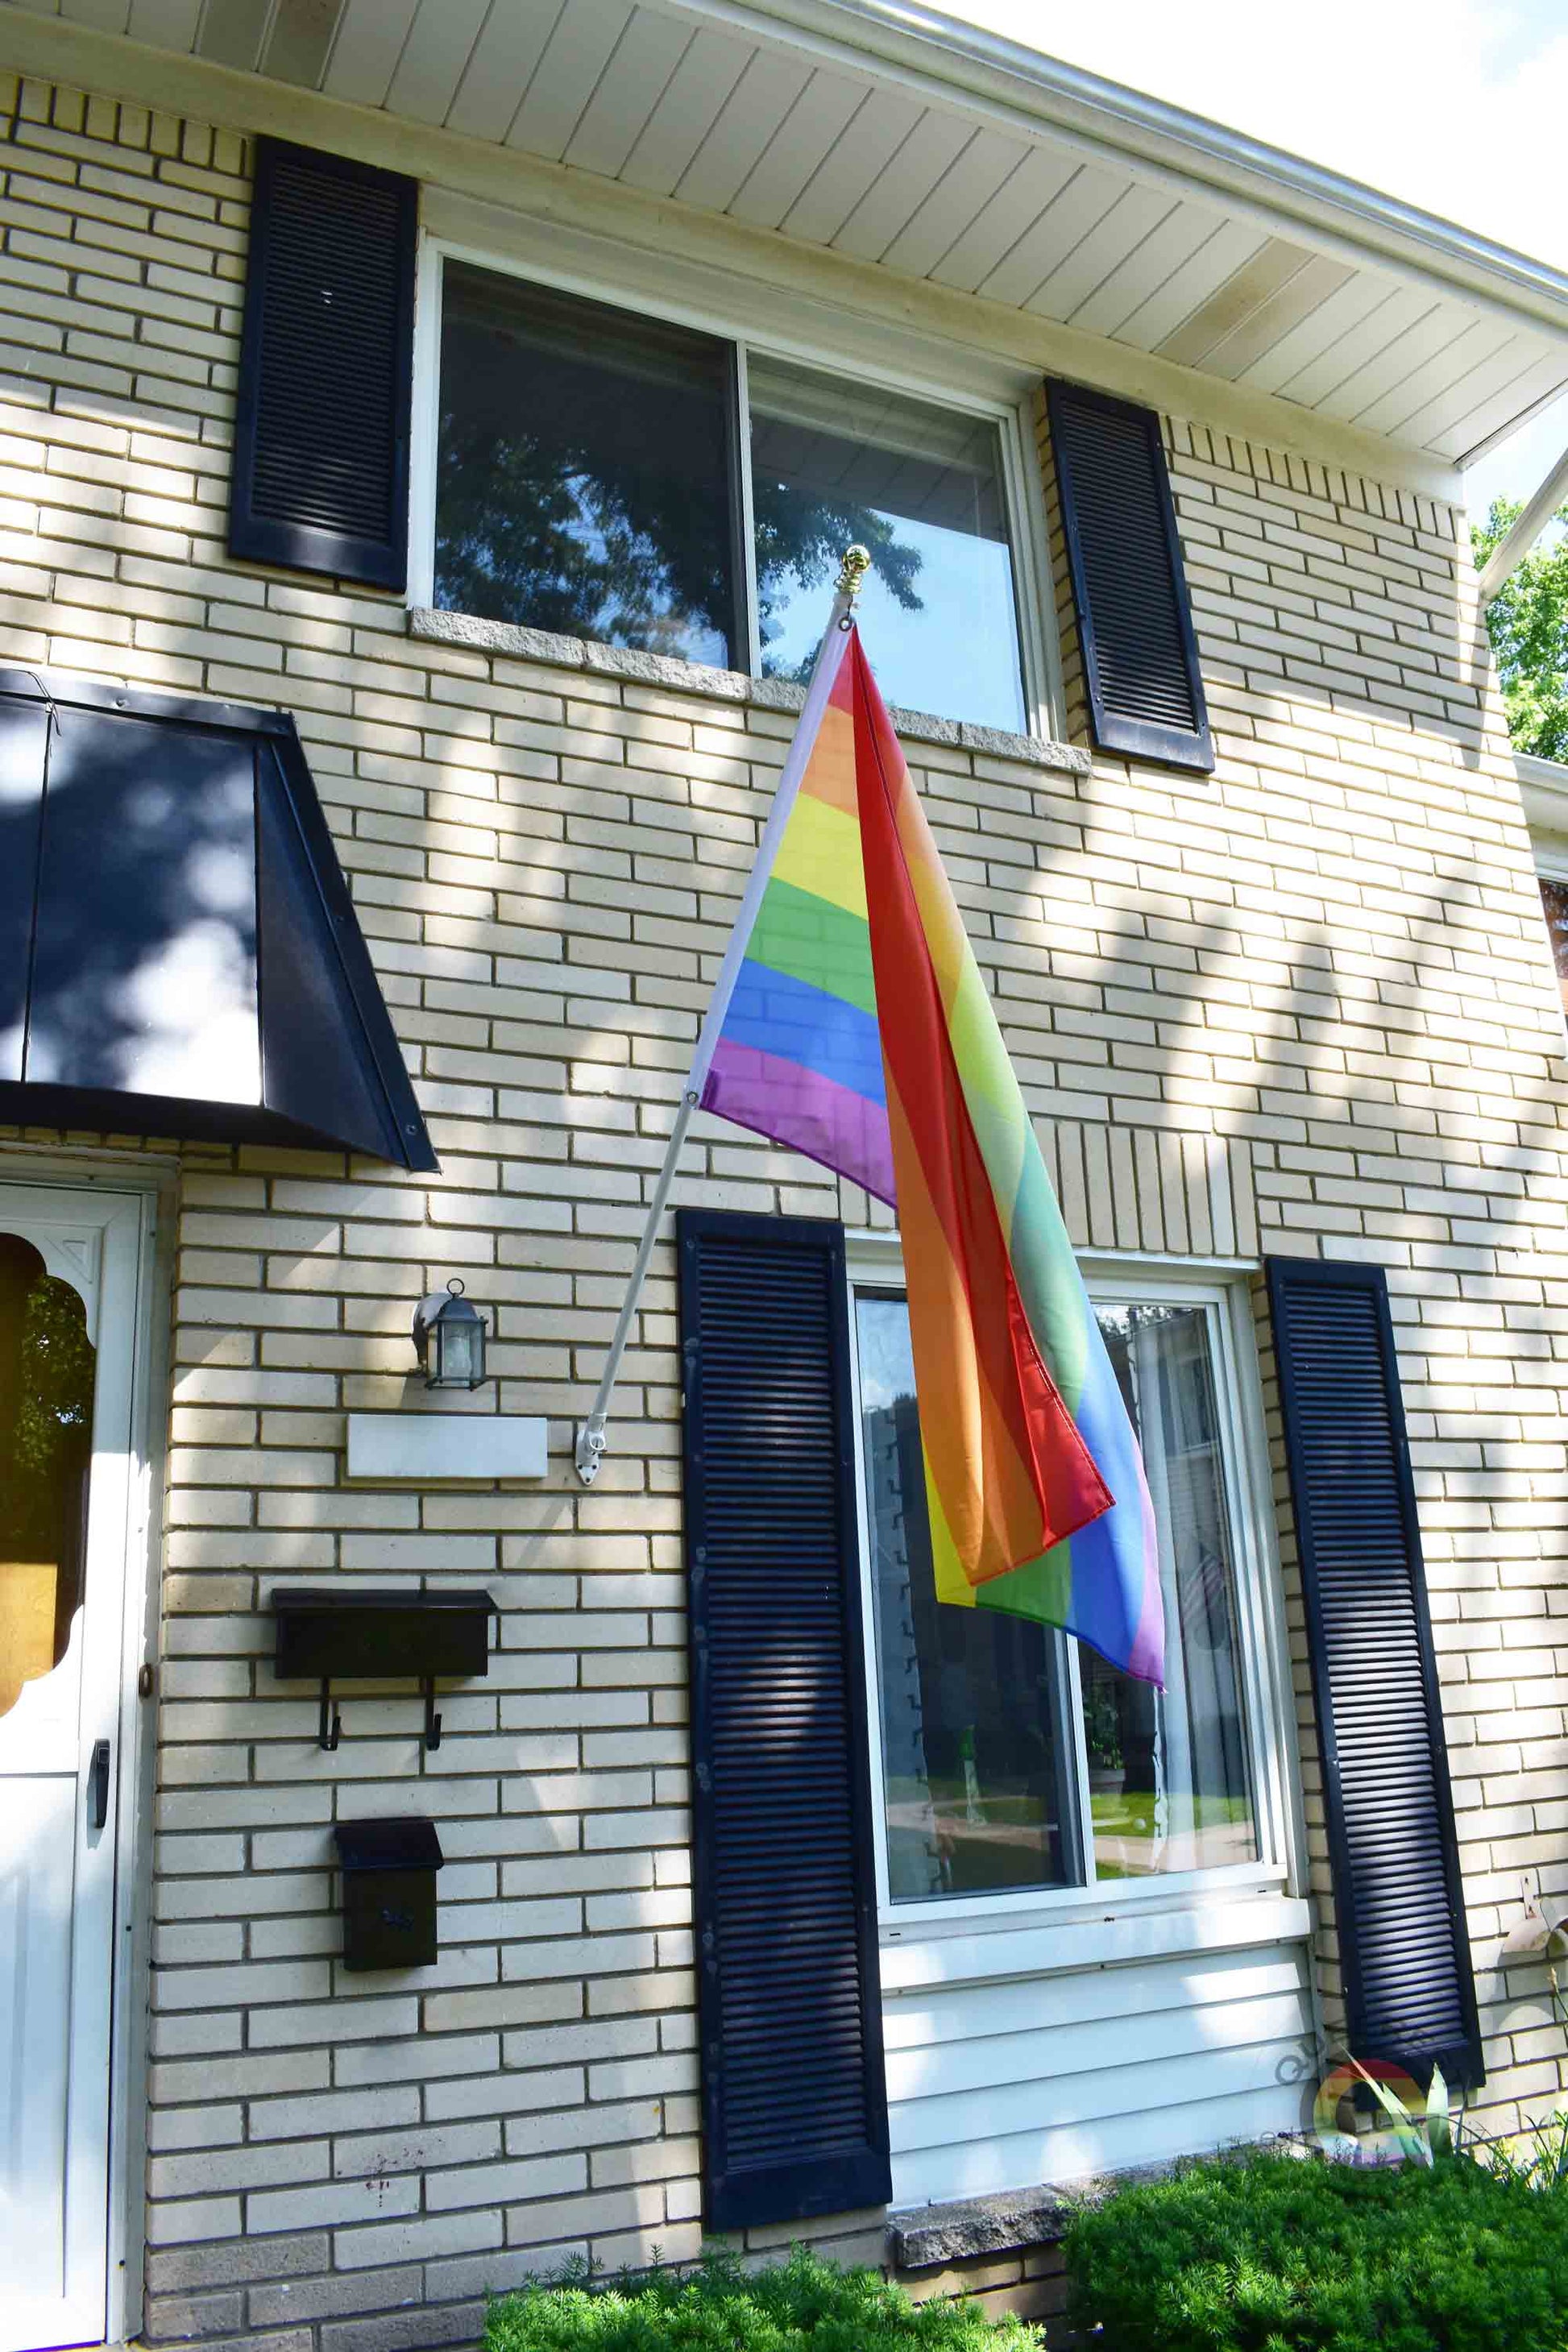 3’x5’ rainbow pride flag hanging from a flagpole on the outside of a light brick house with dark shutters